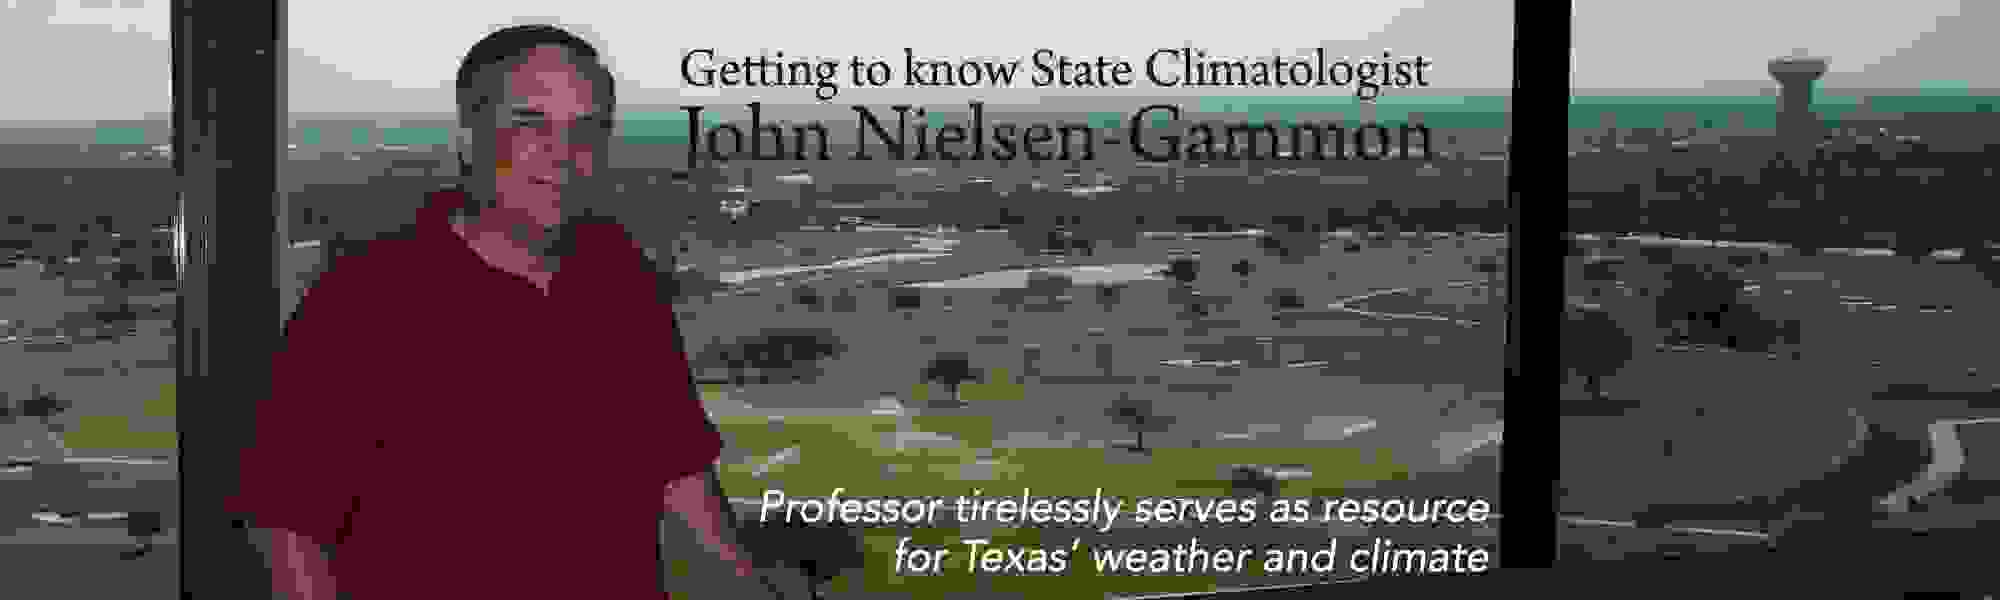 Getting to know State Climatologist John Nielsen-Gammon